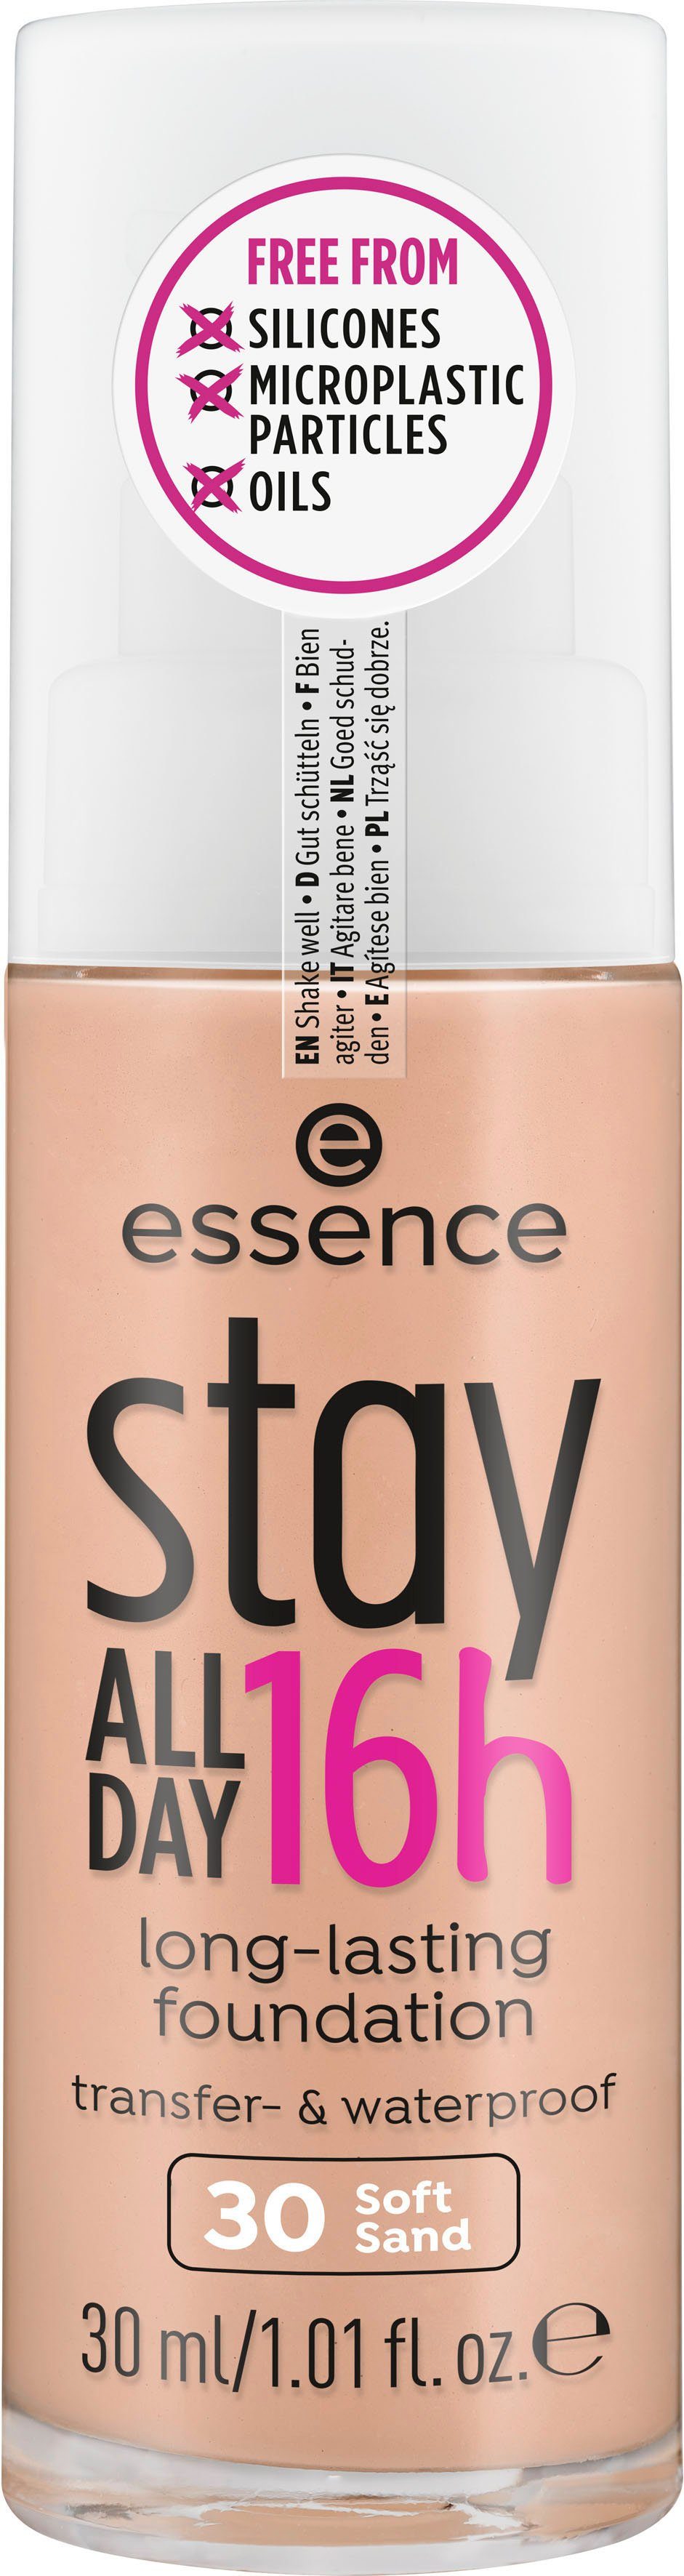 Foundation 16h ALL stay 3-tlg. Soft long-lasting, DAY Essence Sand